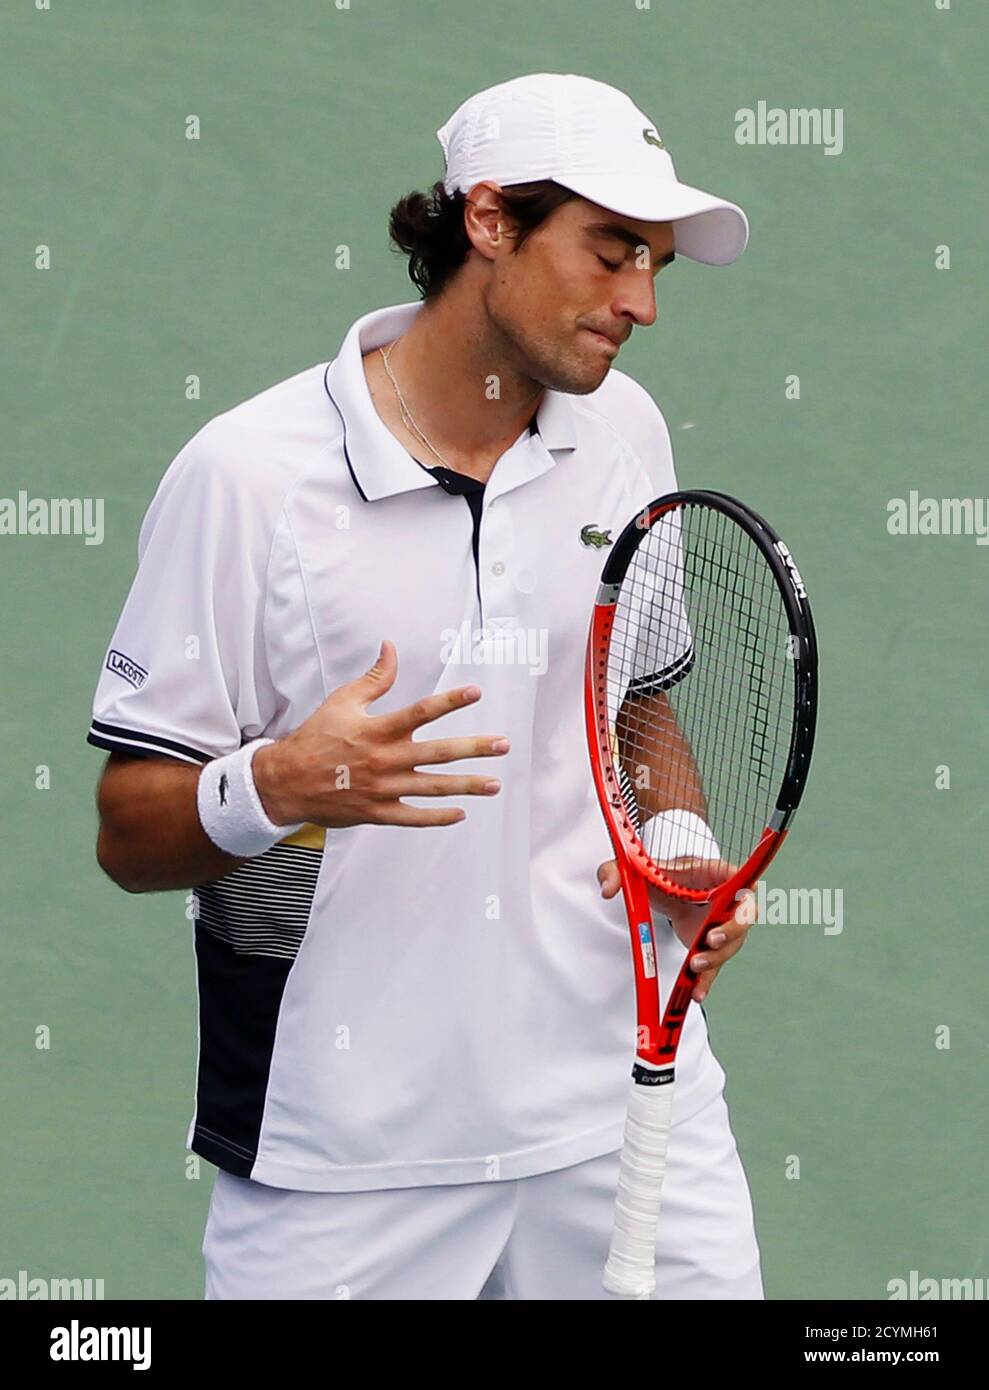 Jeremy Chardy of France reacts after a missed shot against Andy Roddick of  the U.S. during